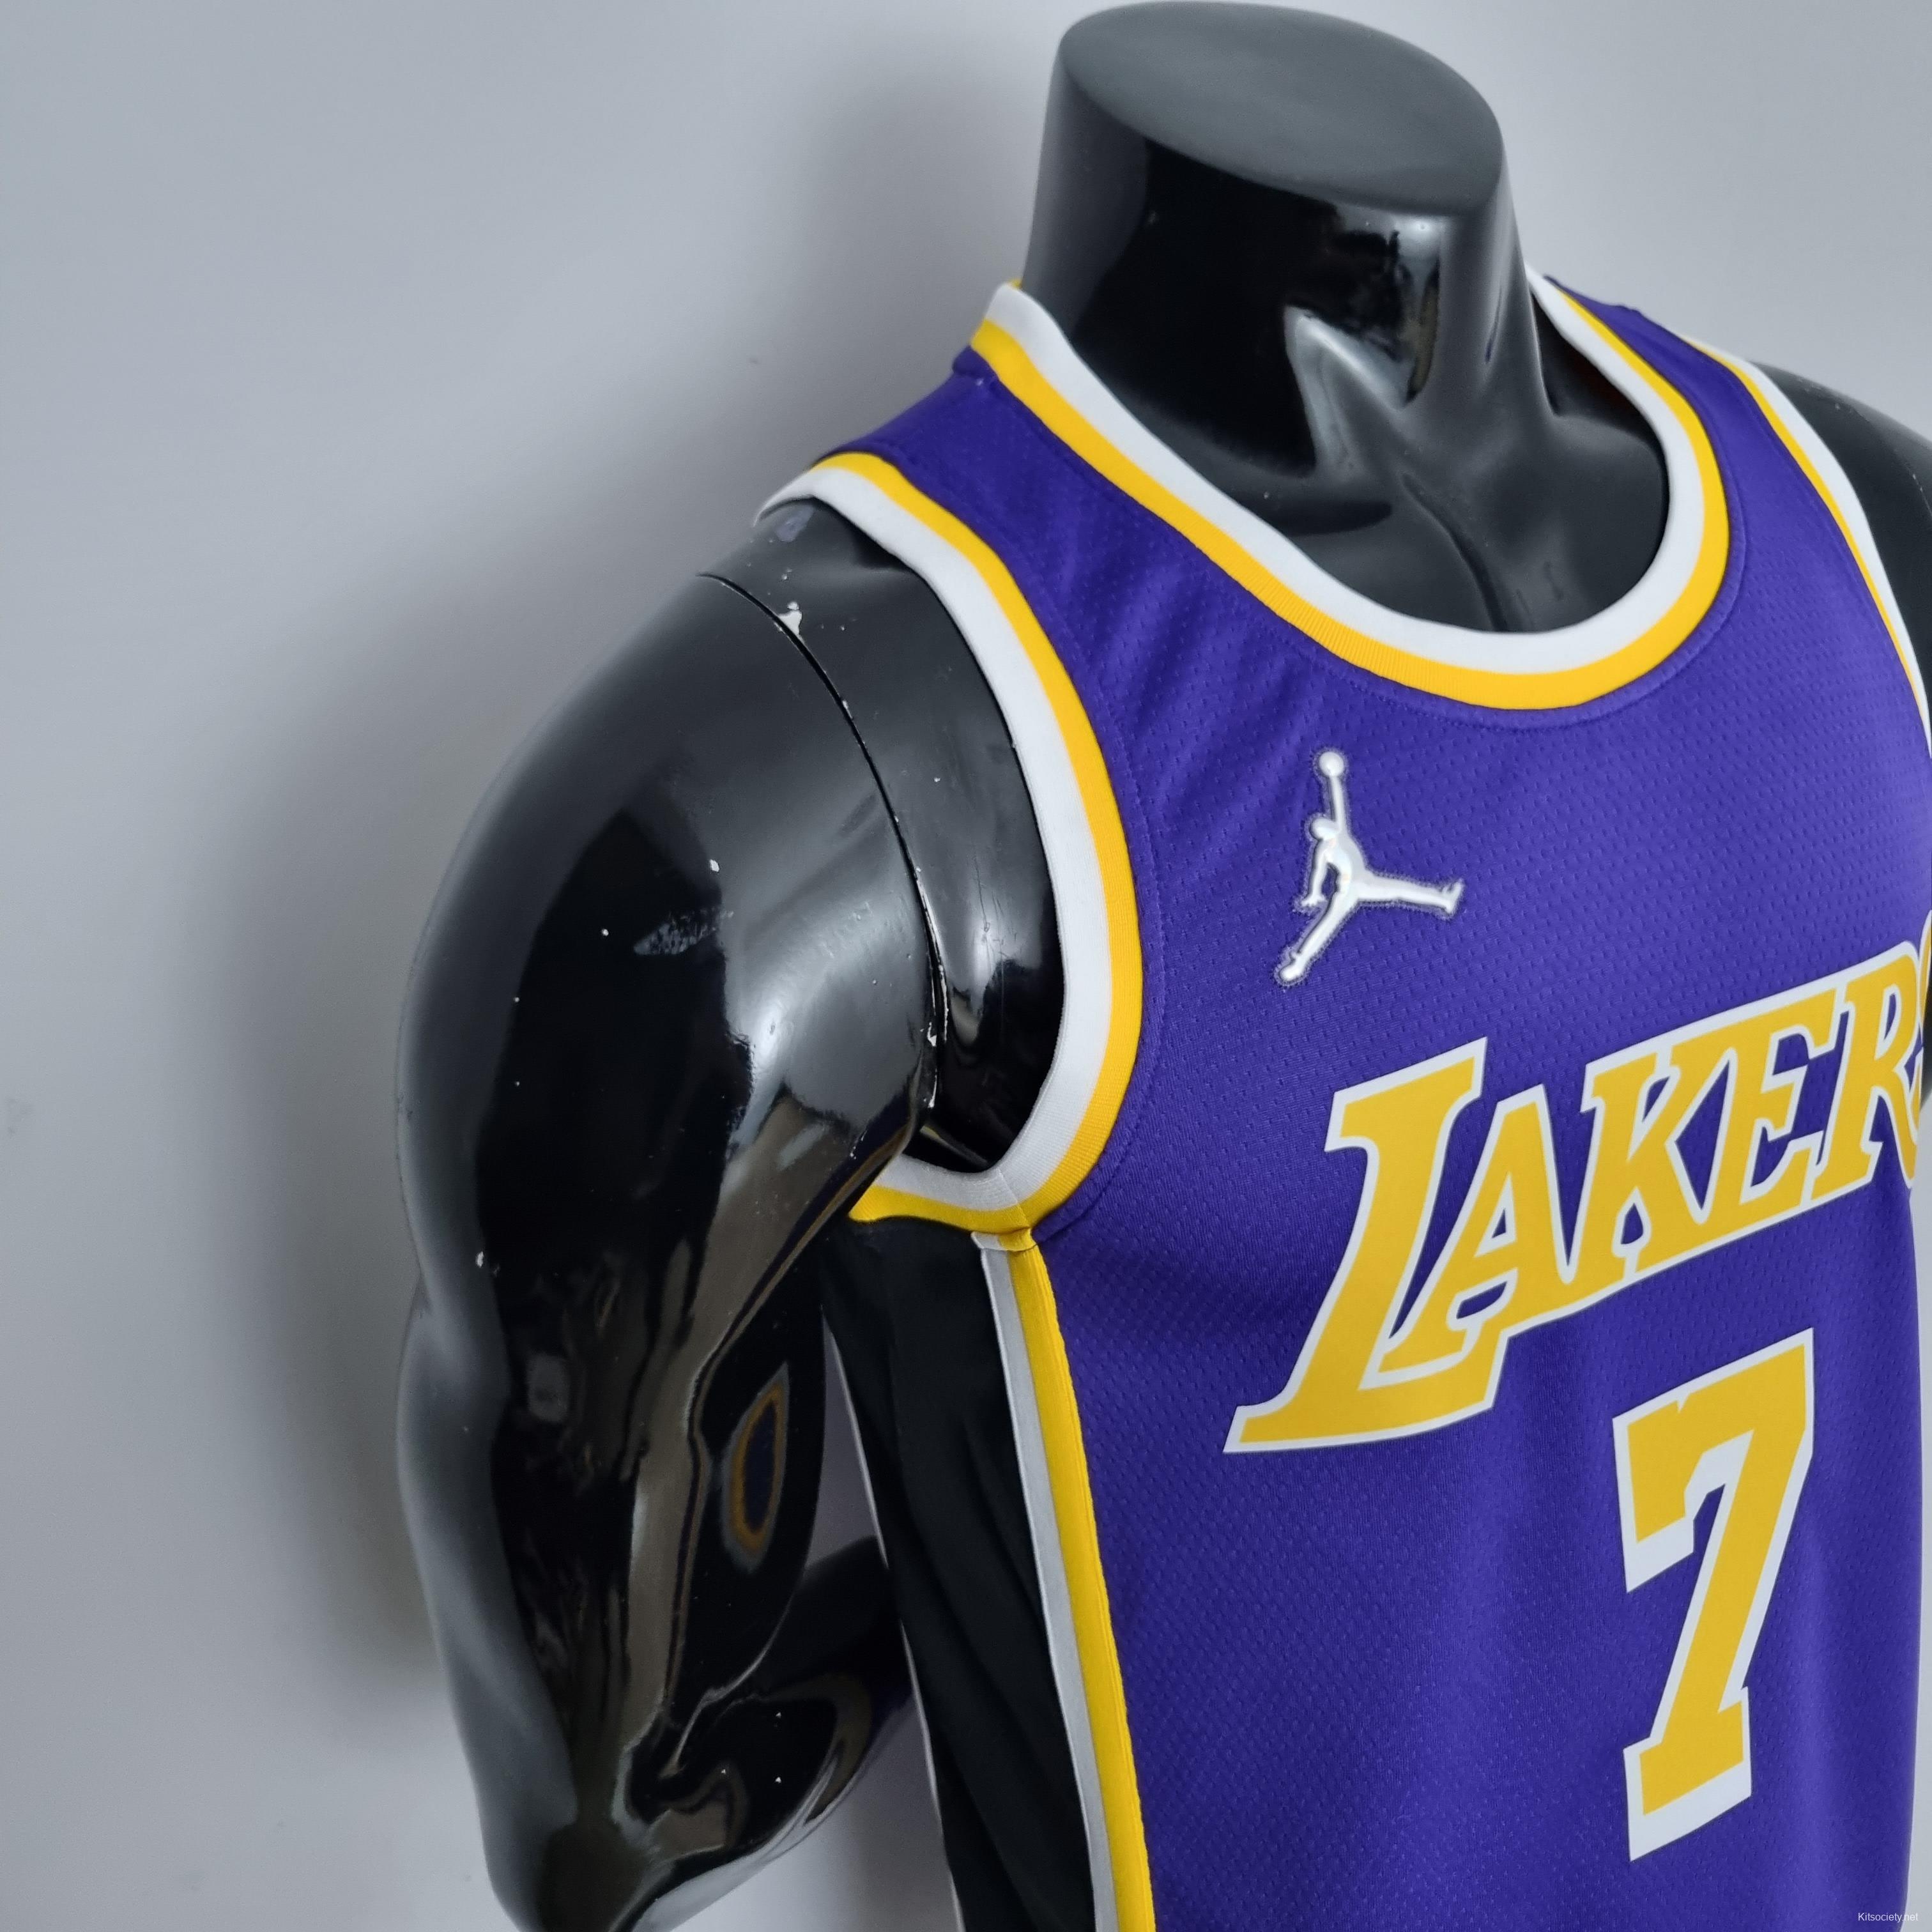 lakers purple and black jersey